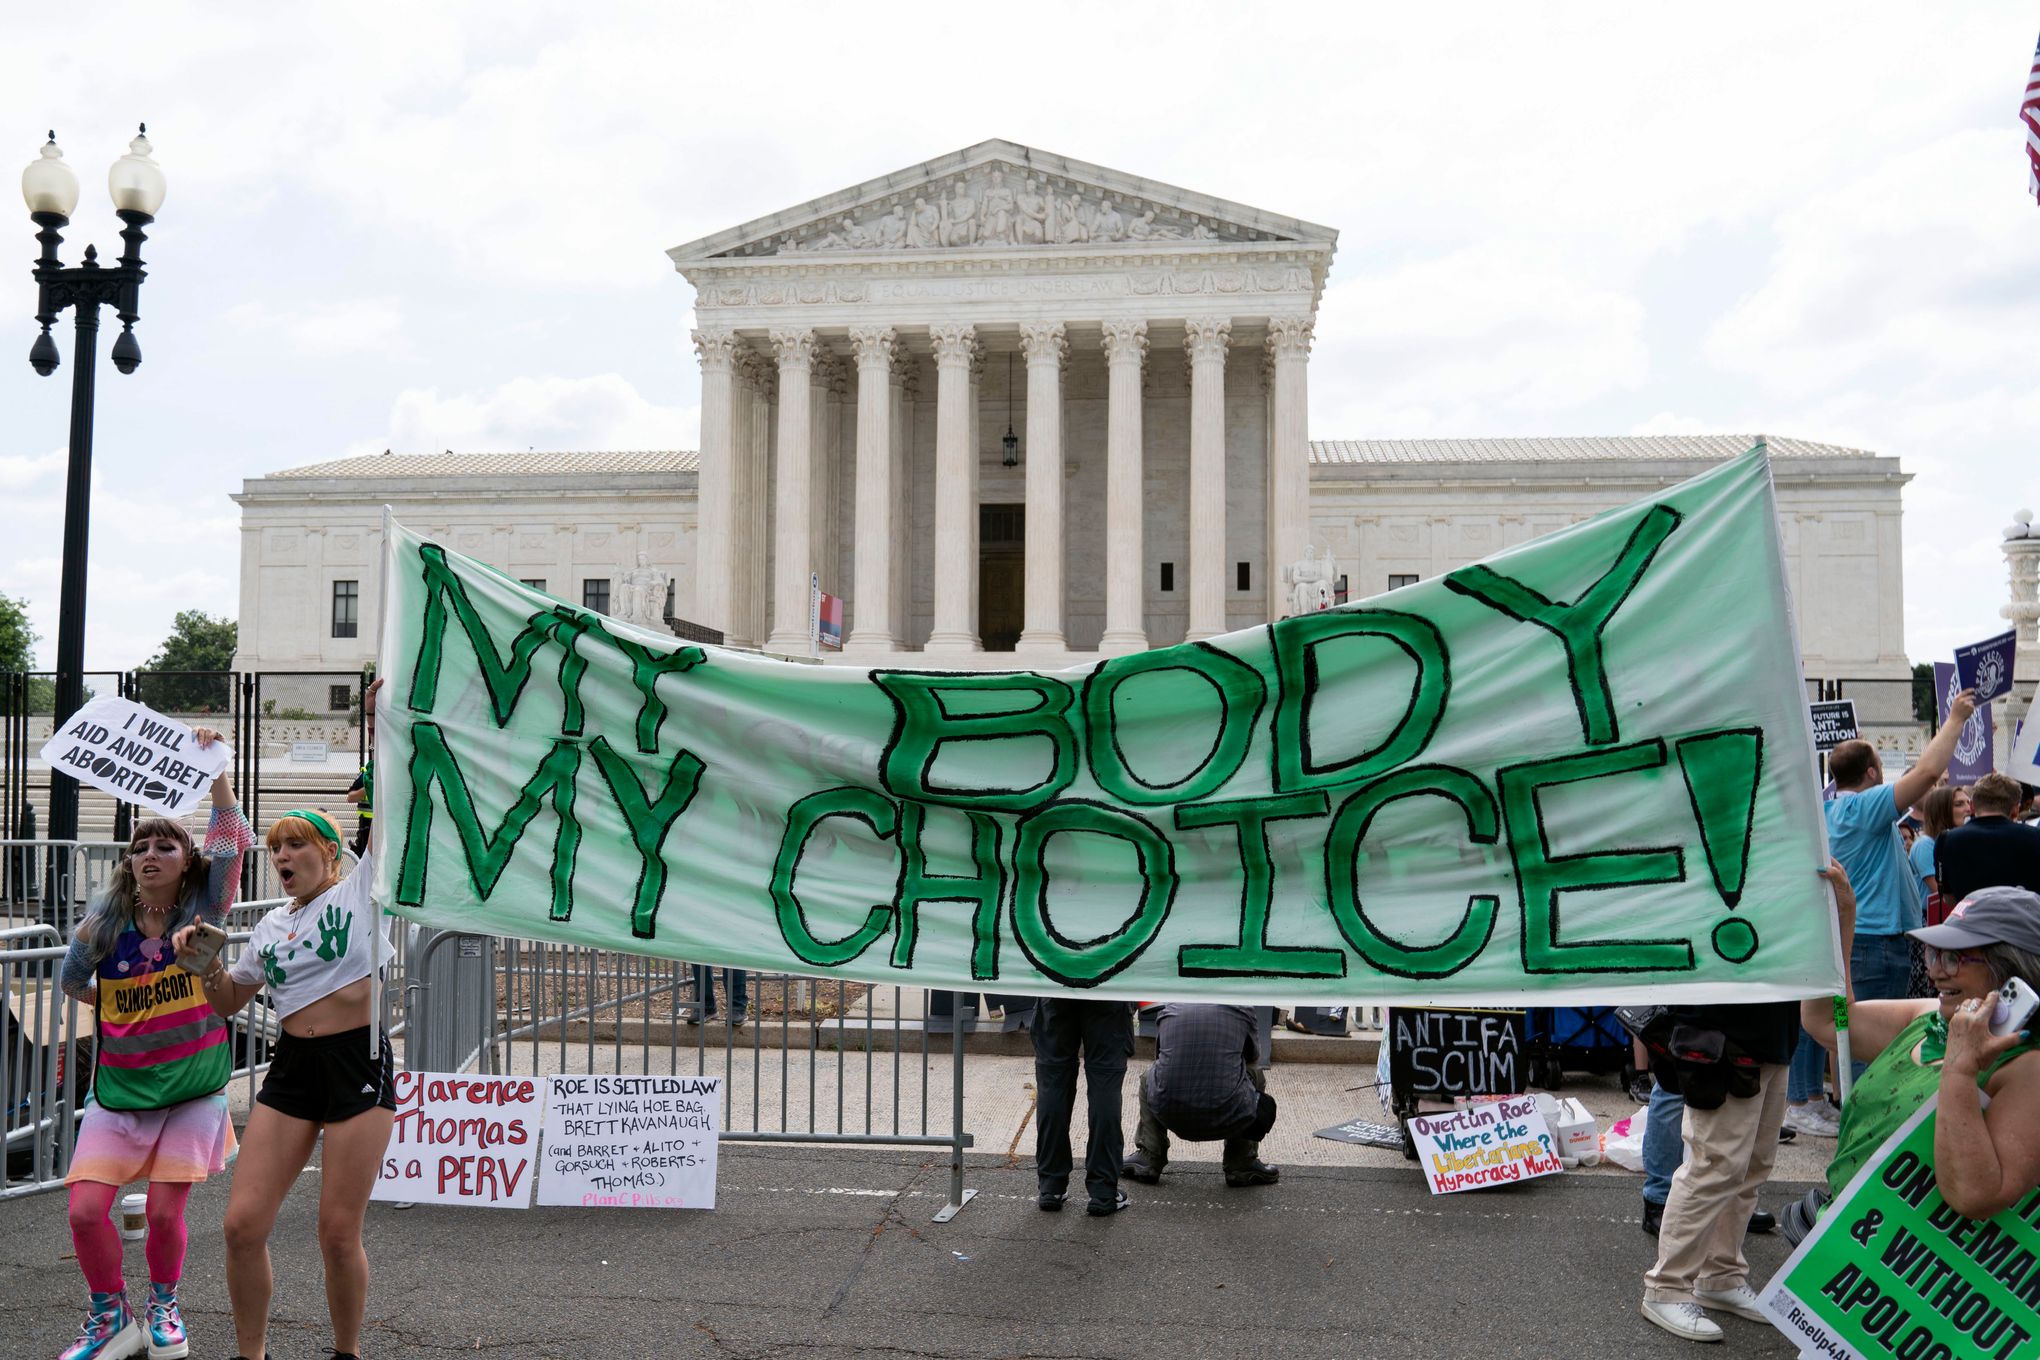 Abortion-rights activists protesting outside the U.S. Supreme Court building in D.C.